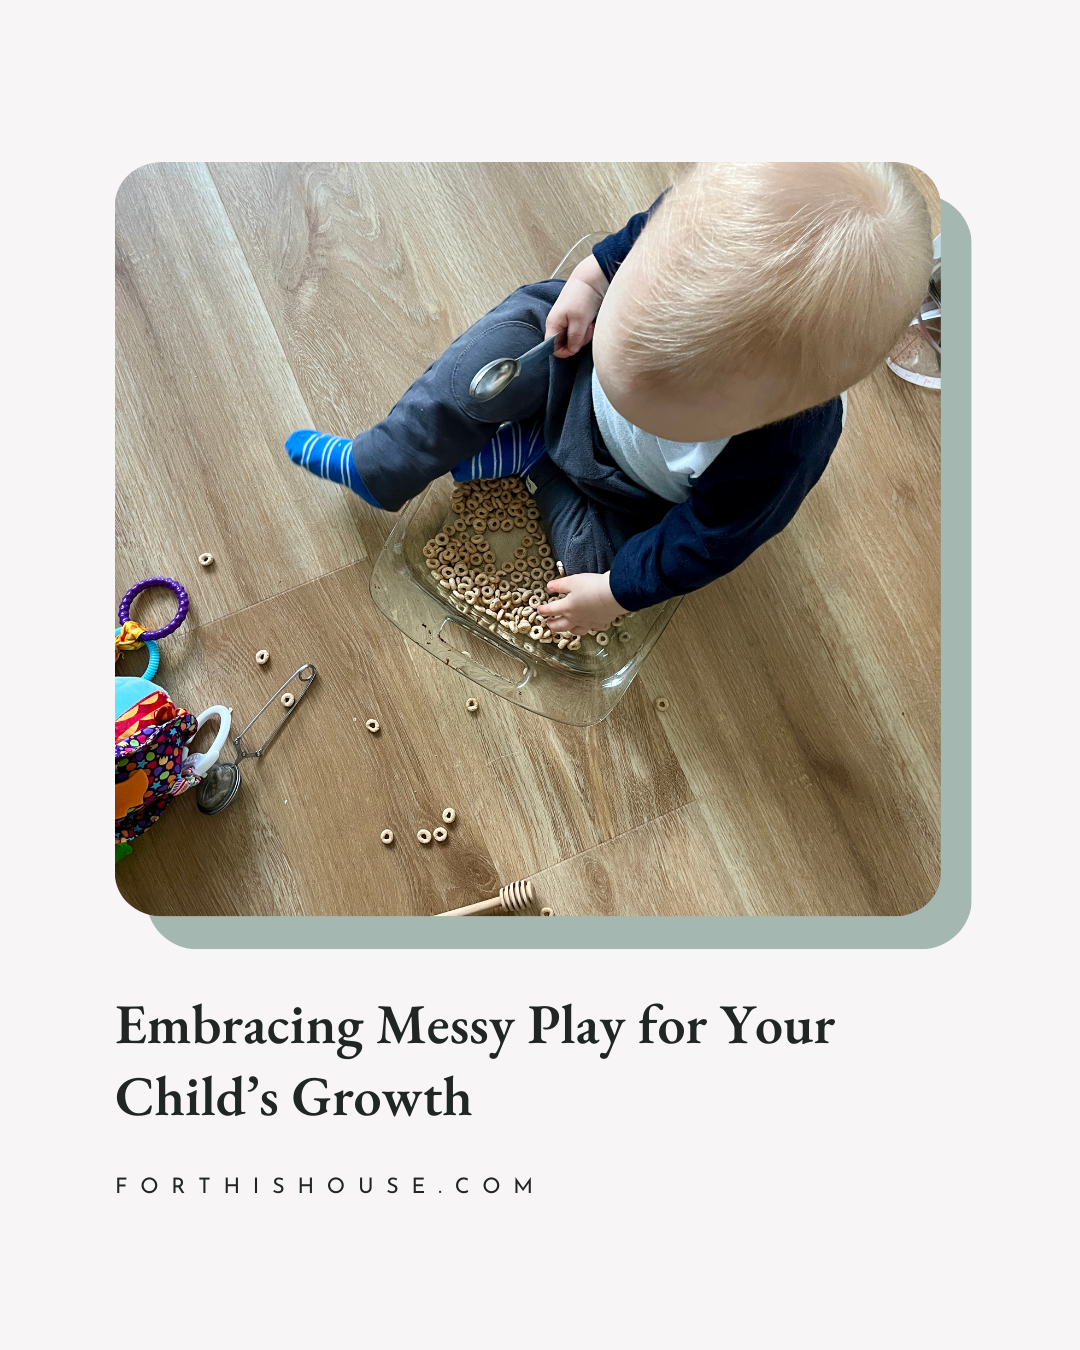 Embracing messy play for your child's growth